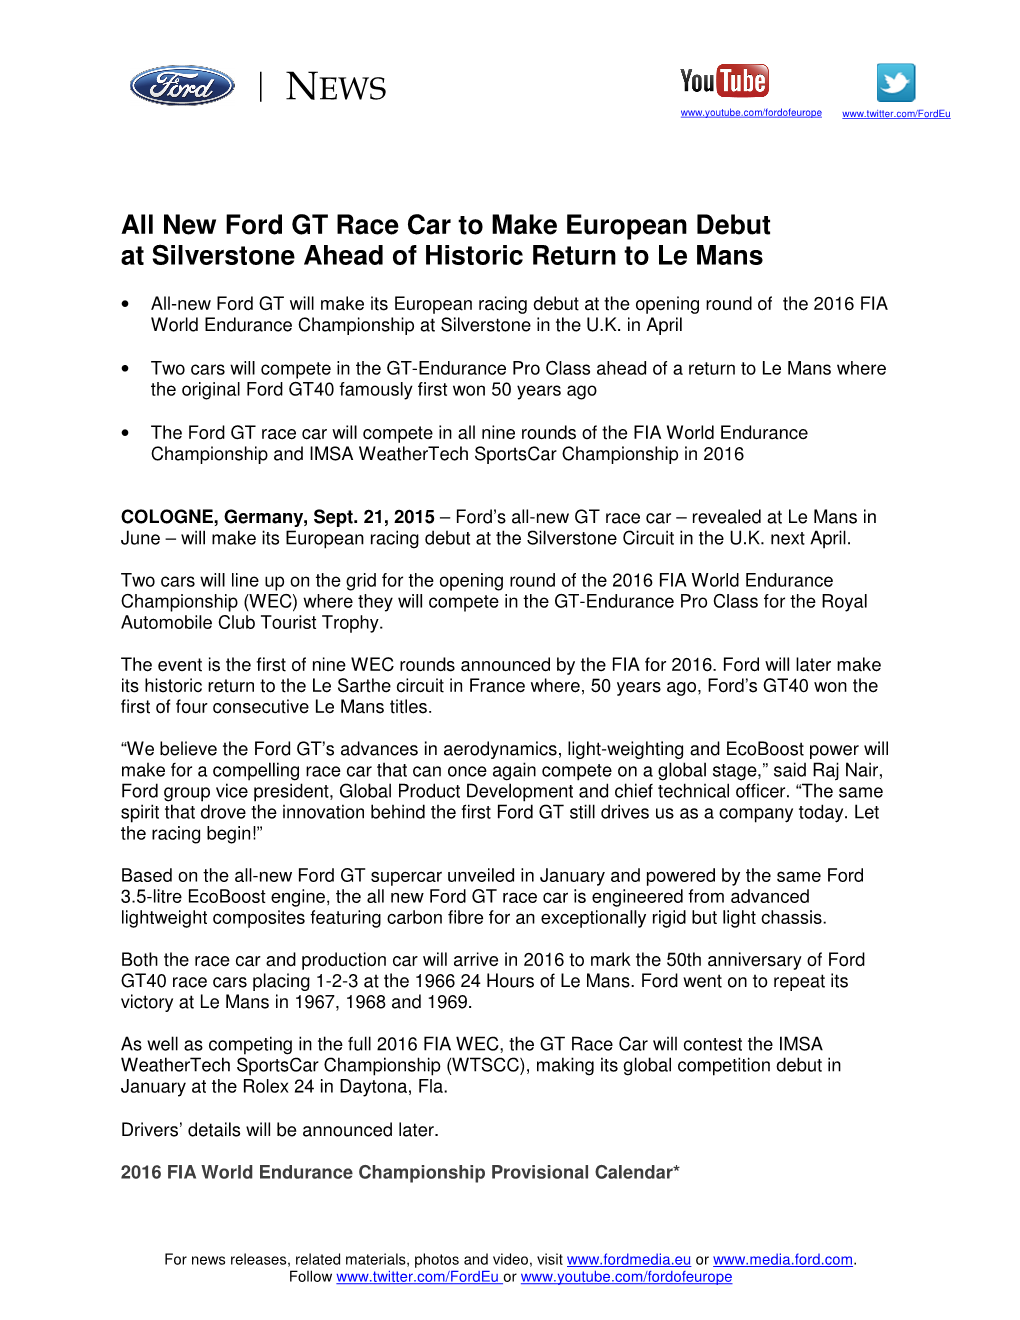 All New Ford GT Race Car to Make European Debut at Silverstone Ahead of Historic Return to Le Mans